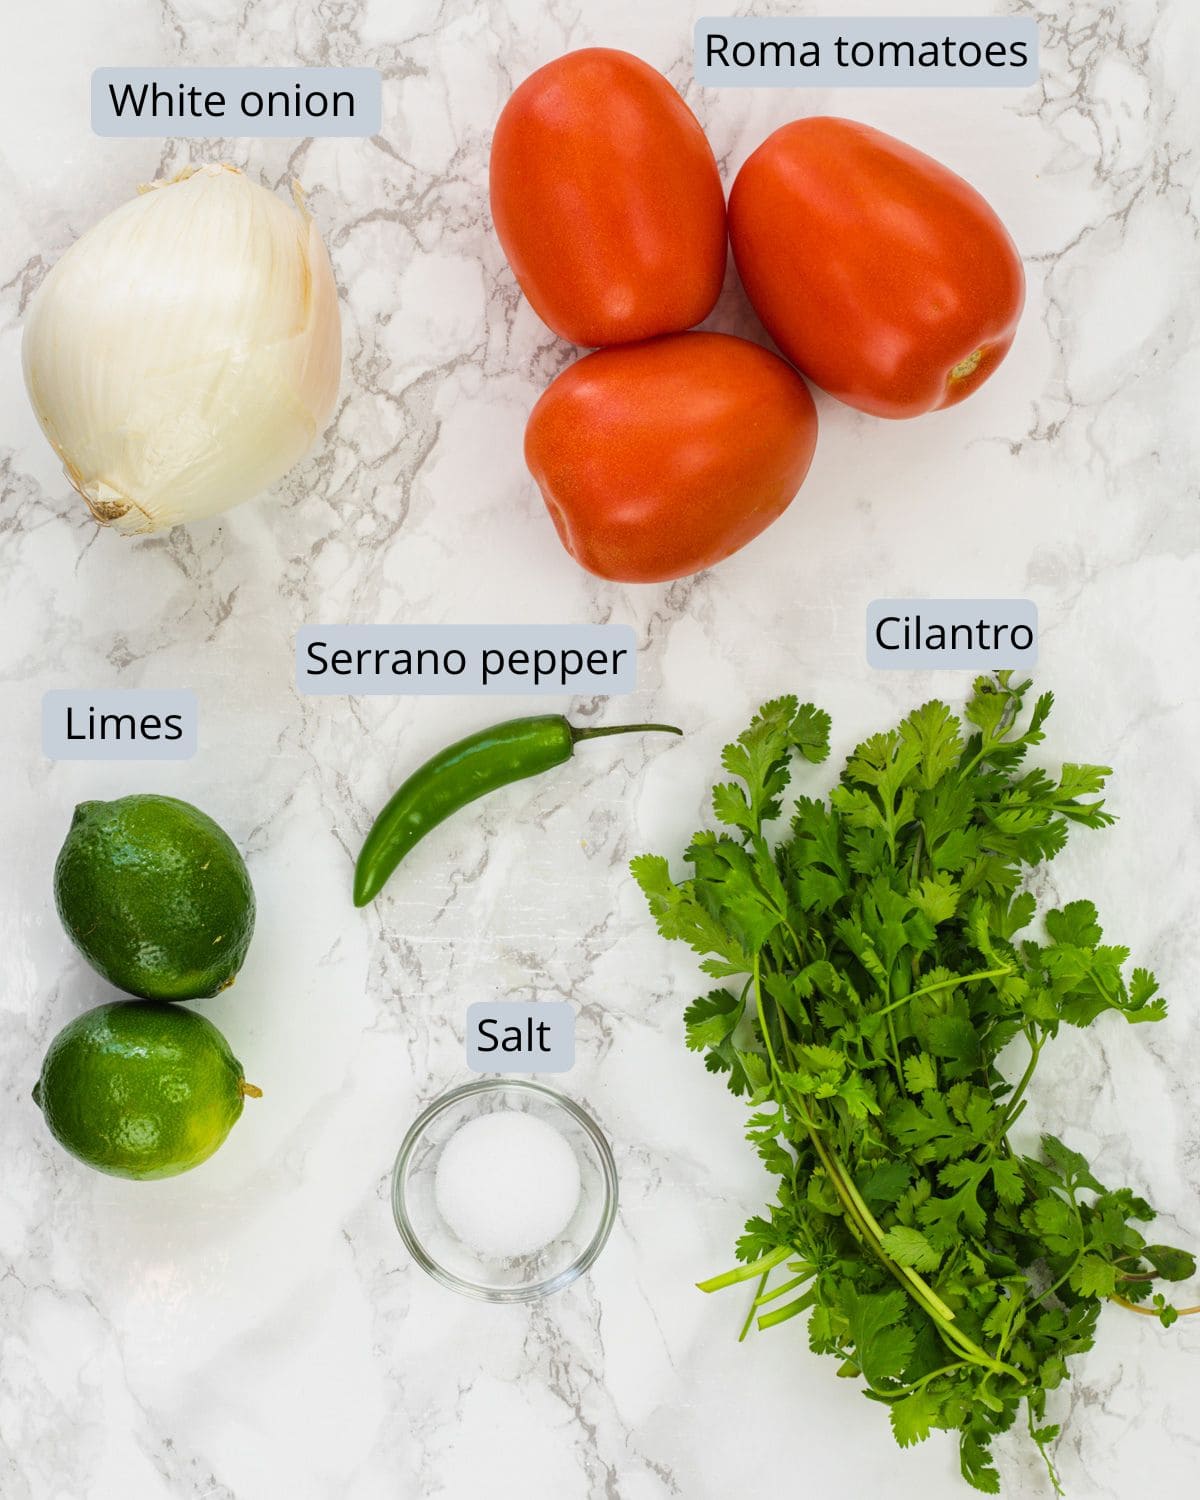 Pico de gallo ingredients on a marble surface with labels.